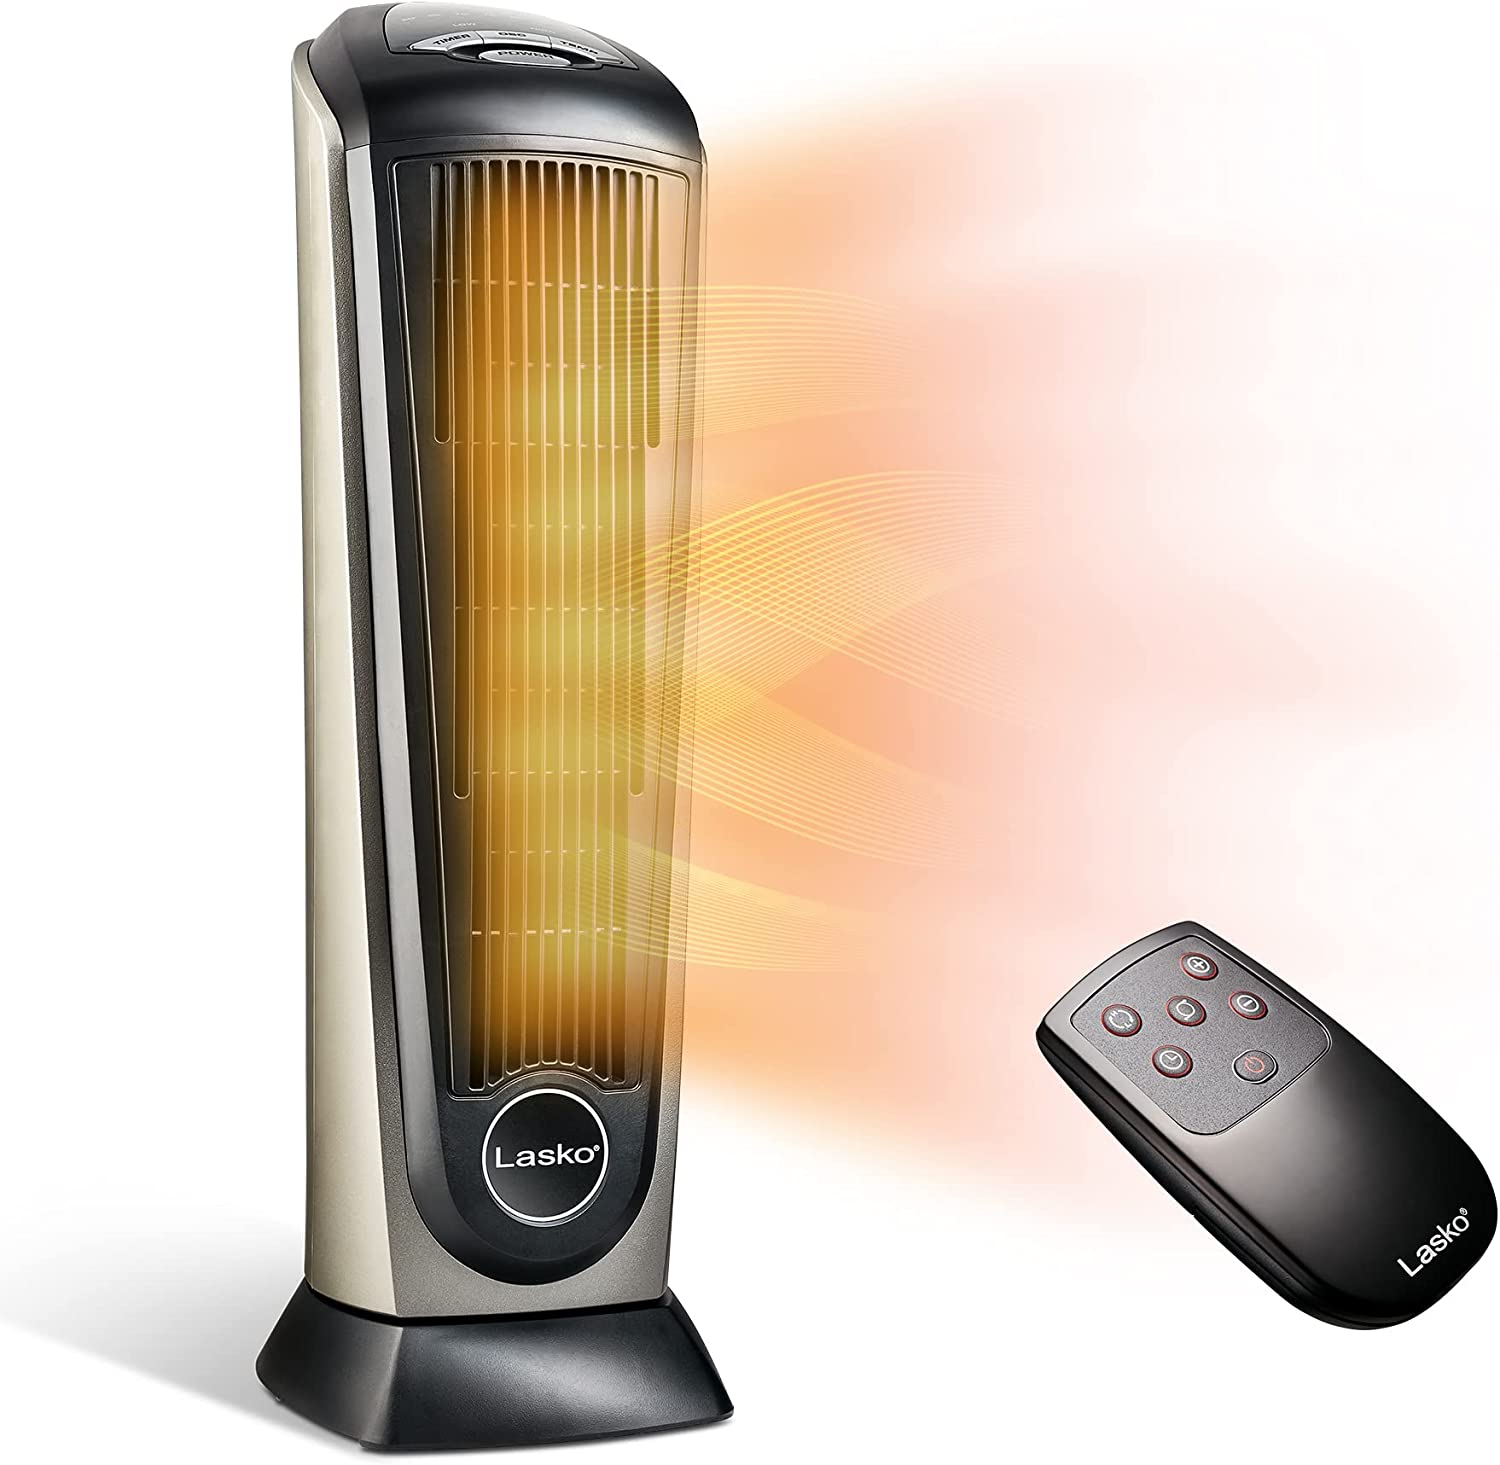 Lasko Oscillating Ceramic Tower Space Heater for Home [...]